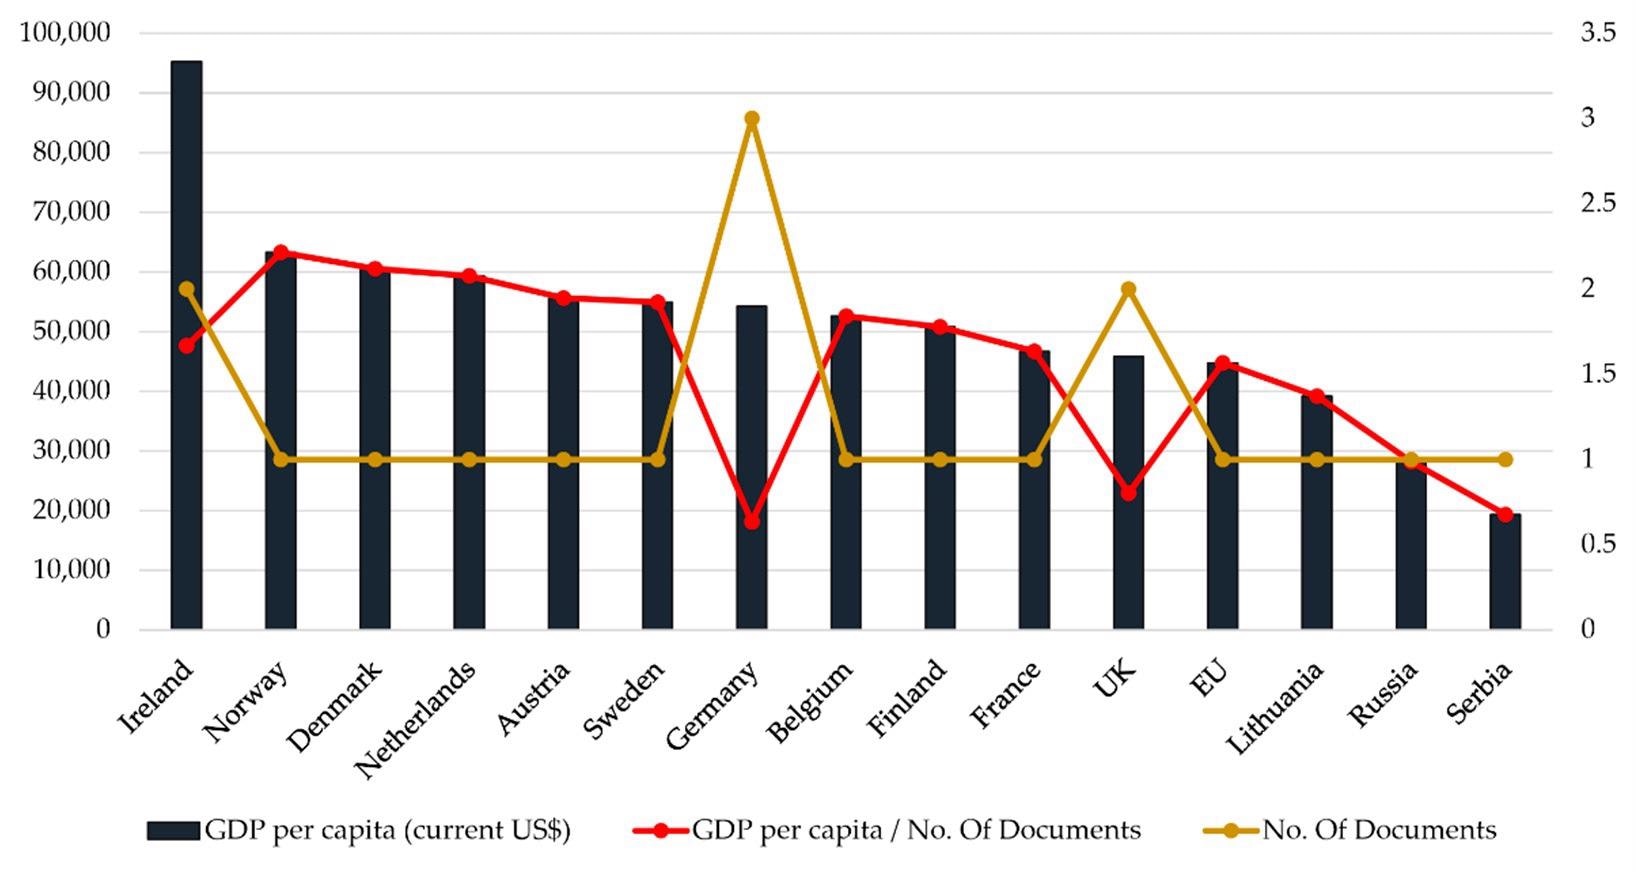 Relationship between adopted documents and GDP per capita in 2020 for European countries (analysis is based on data given in [6,38–41,43]).